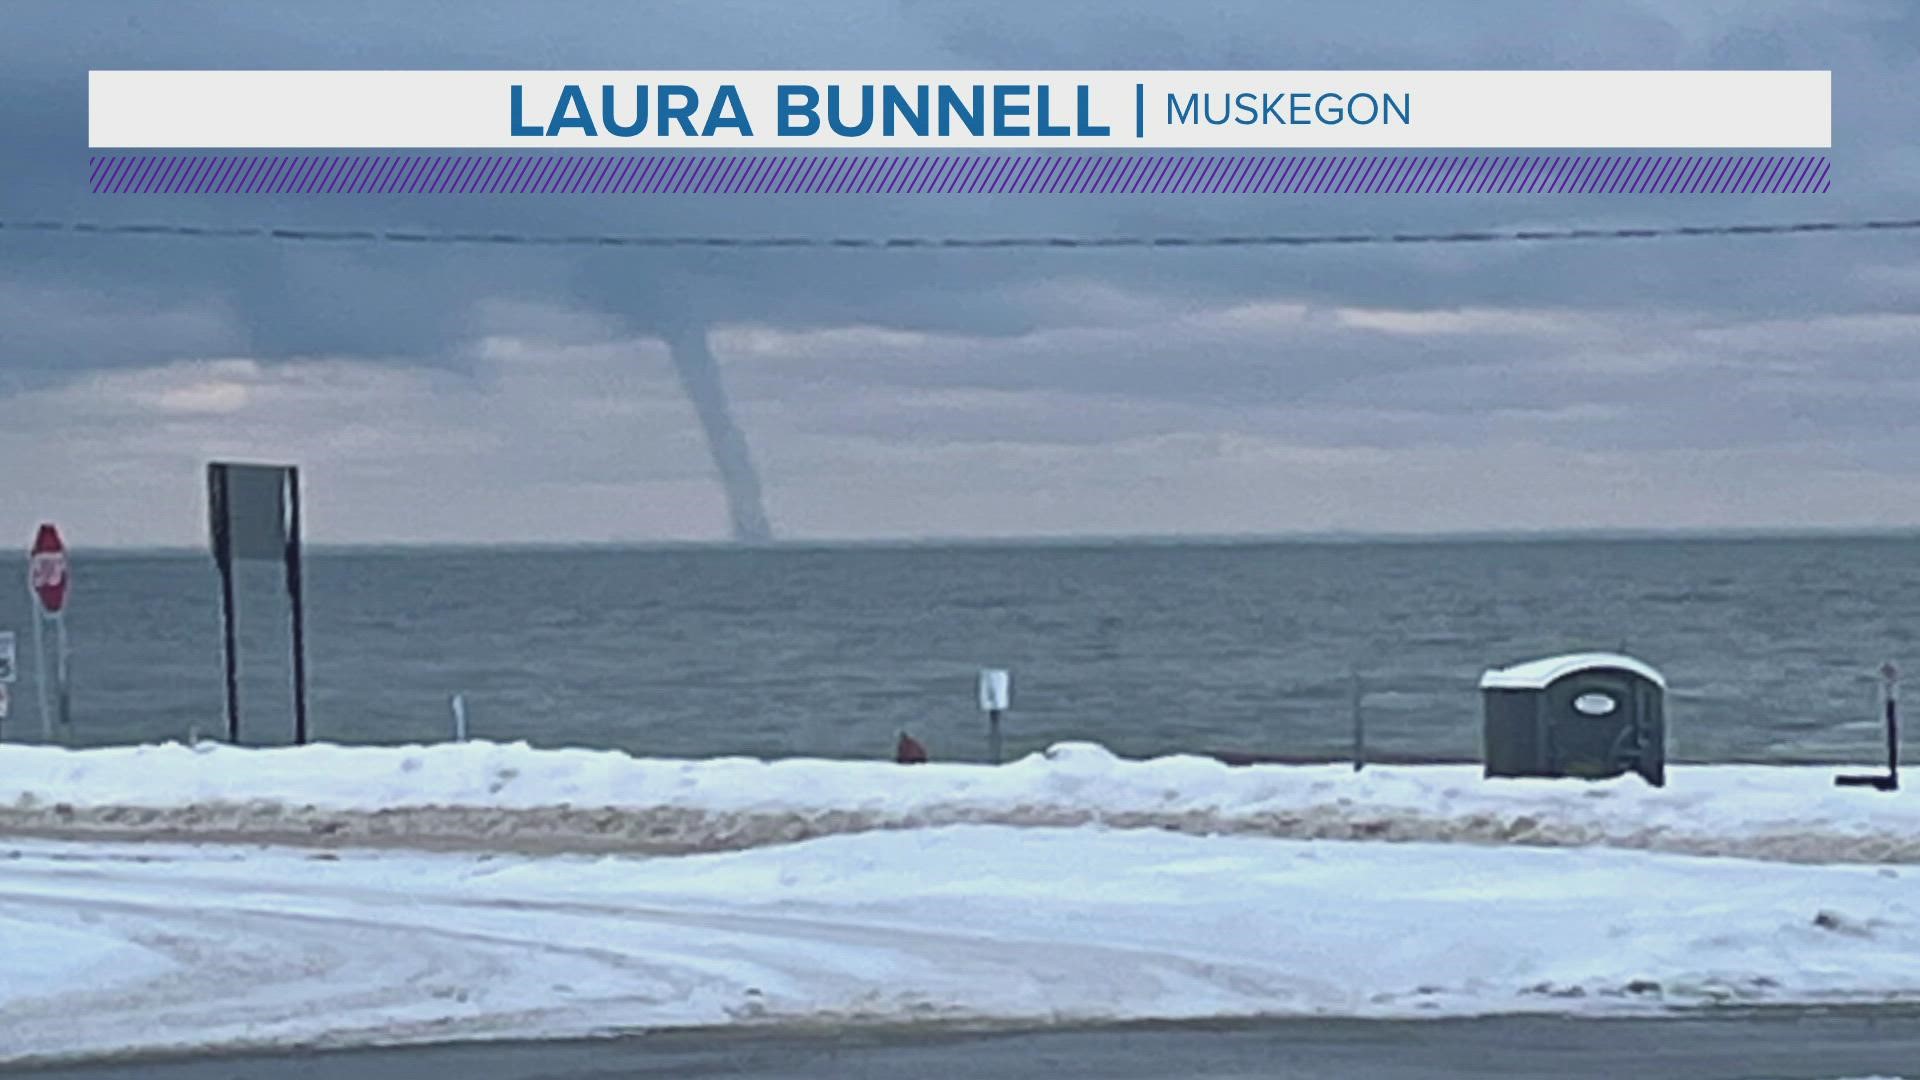 We've seen a few photos of waterspouts around West Michigan from this week, something pretty rare for January. Meteorologist Michael Behrens explains how they form!